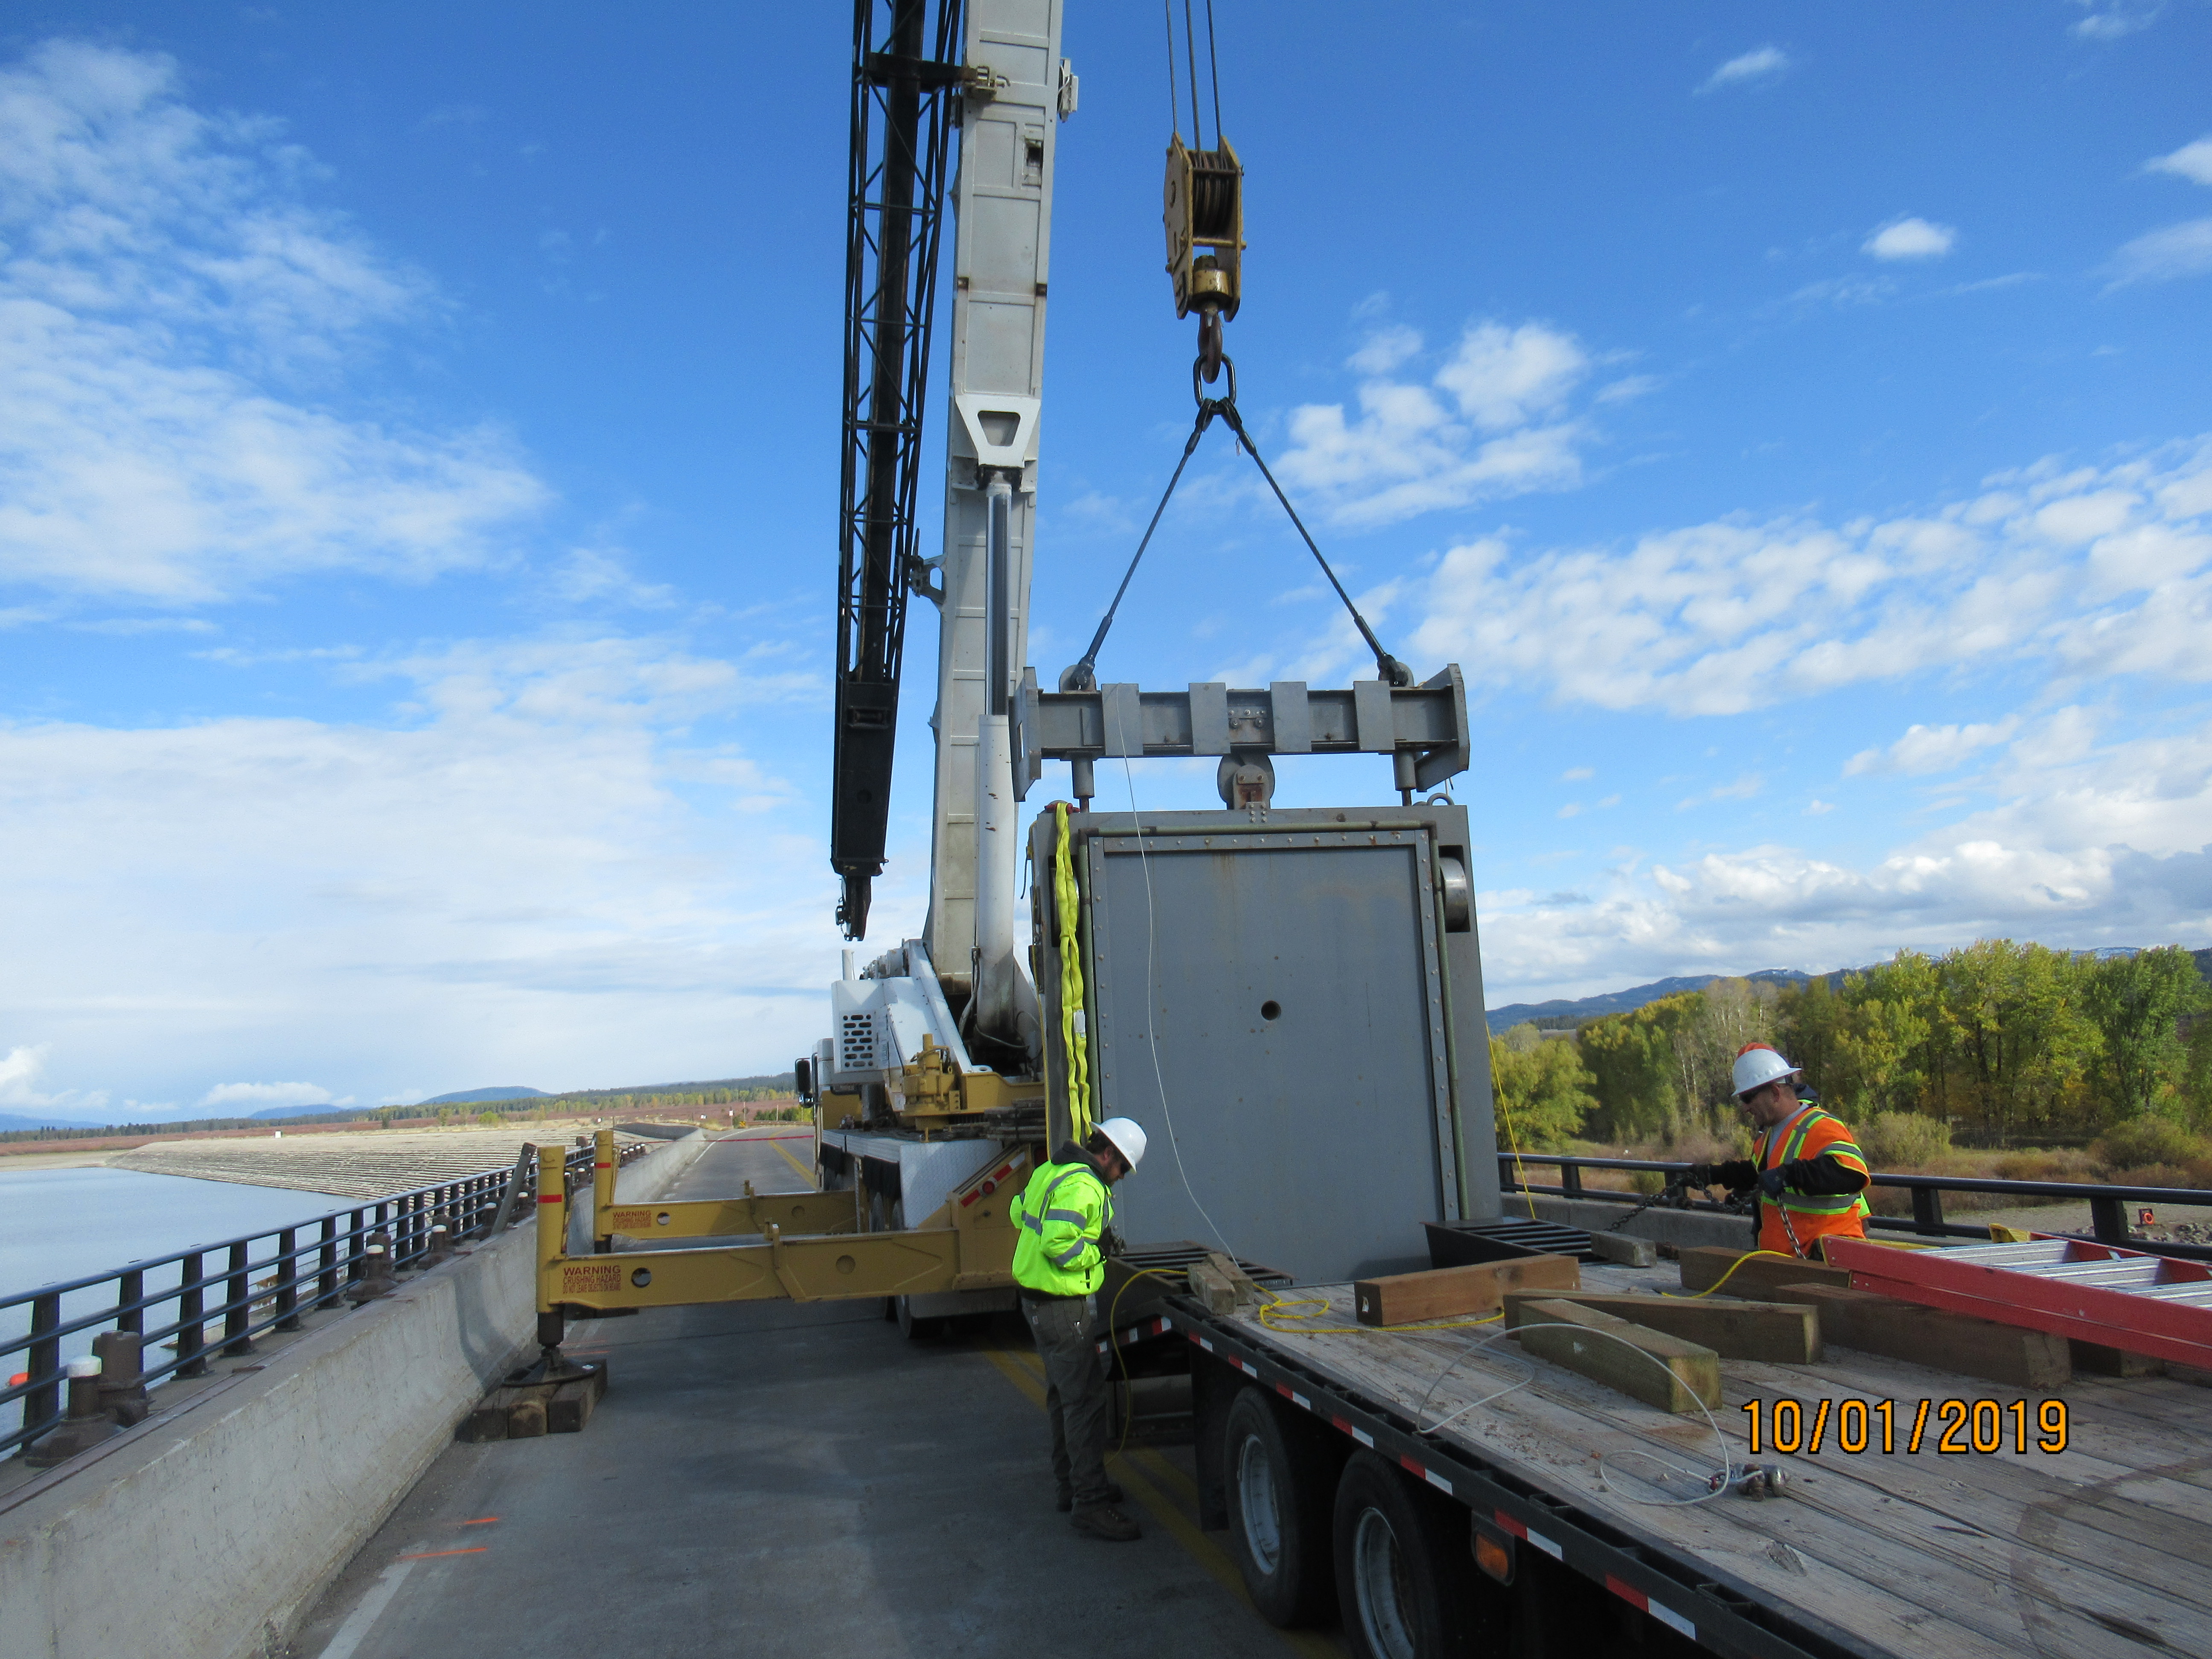 Crane work taking place to set and move the bulkhead gate to inspect and perform maintenance work on multiple reservoir release gates at the Jackson Lake Dam.